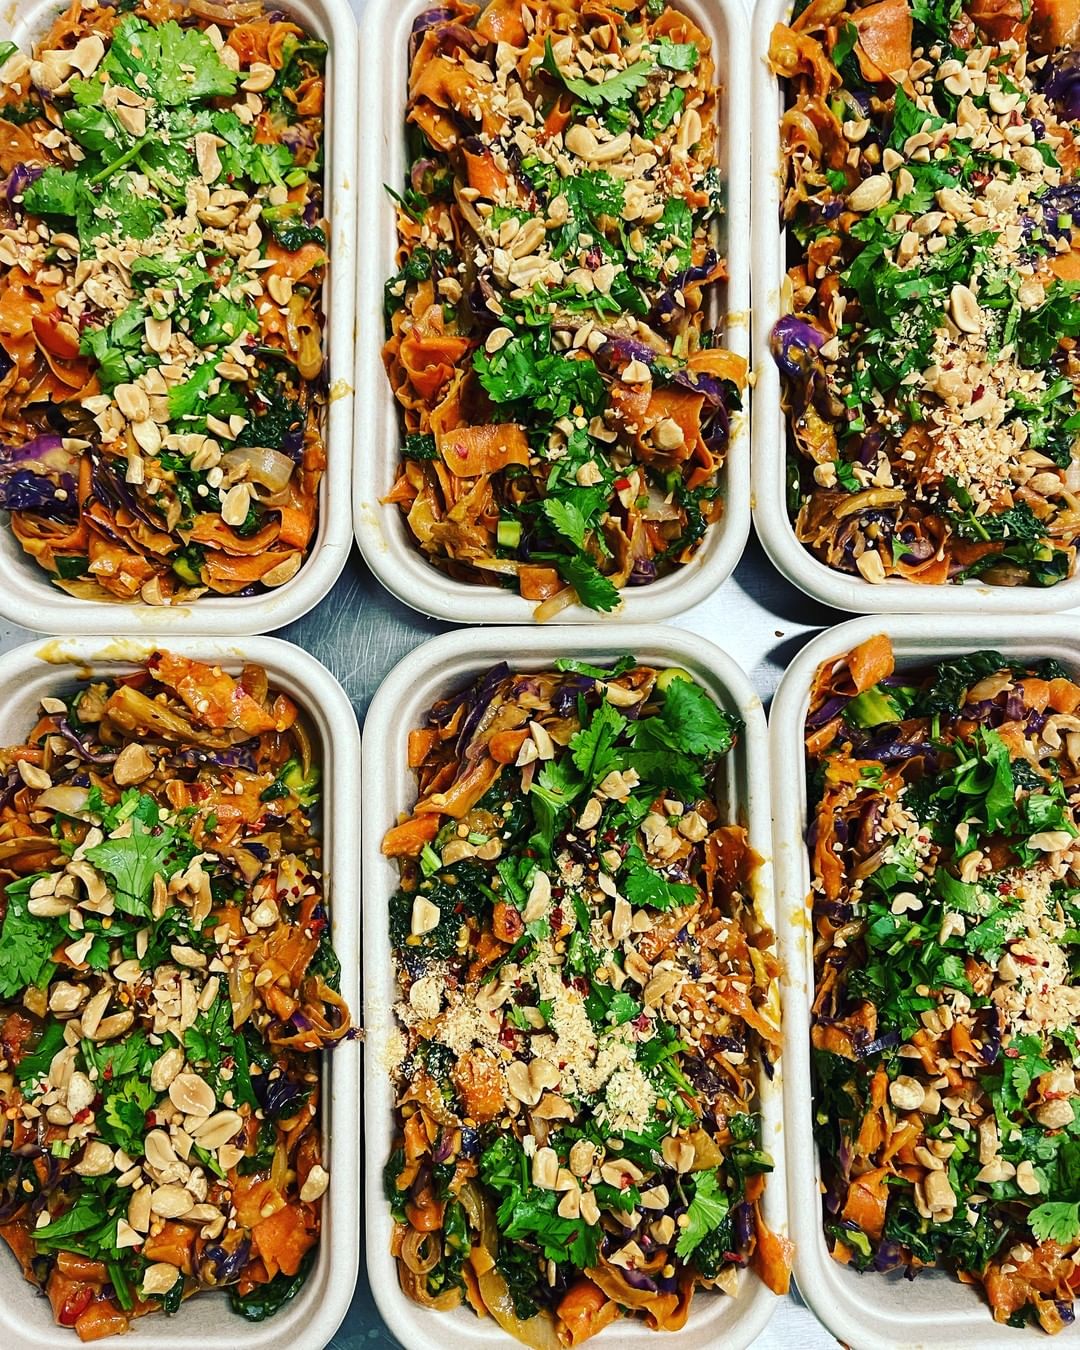 Carrot pad thai eco friendly packaging